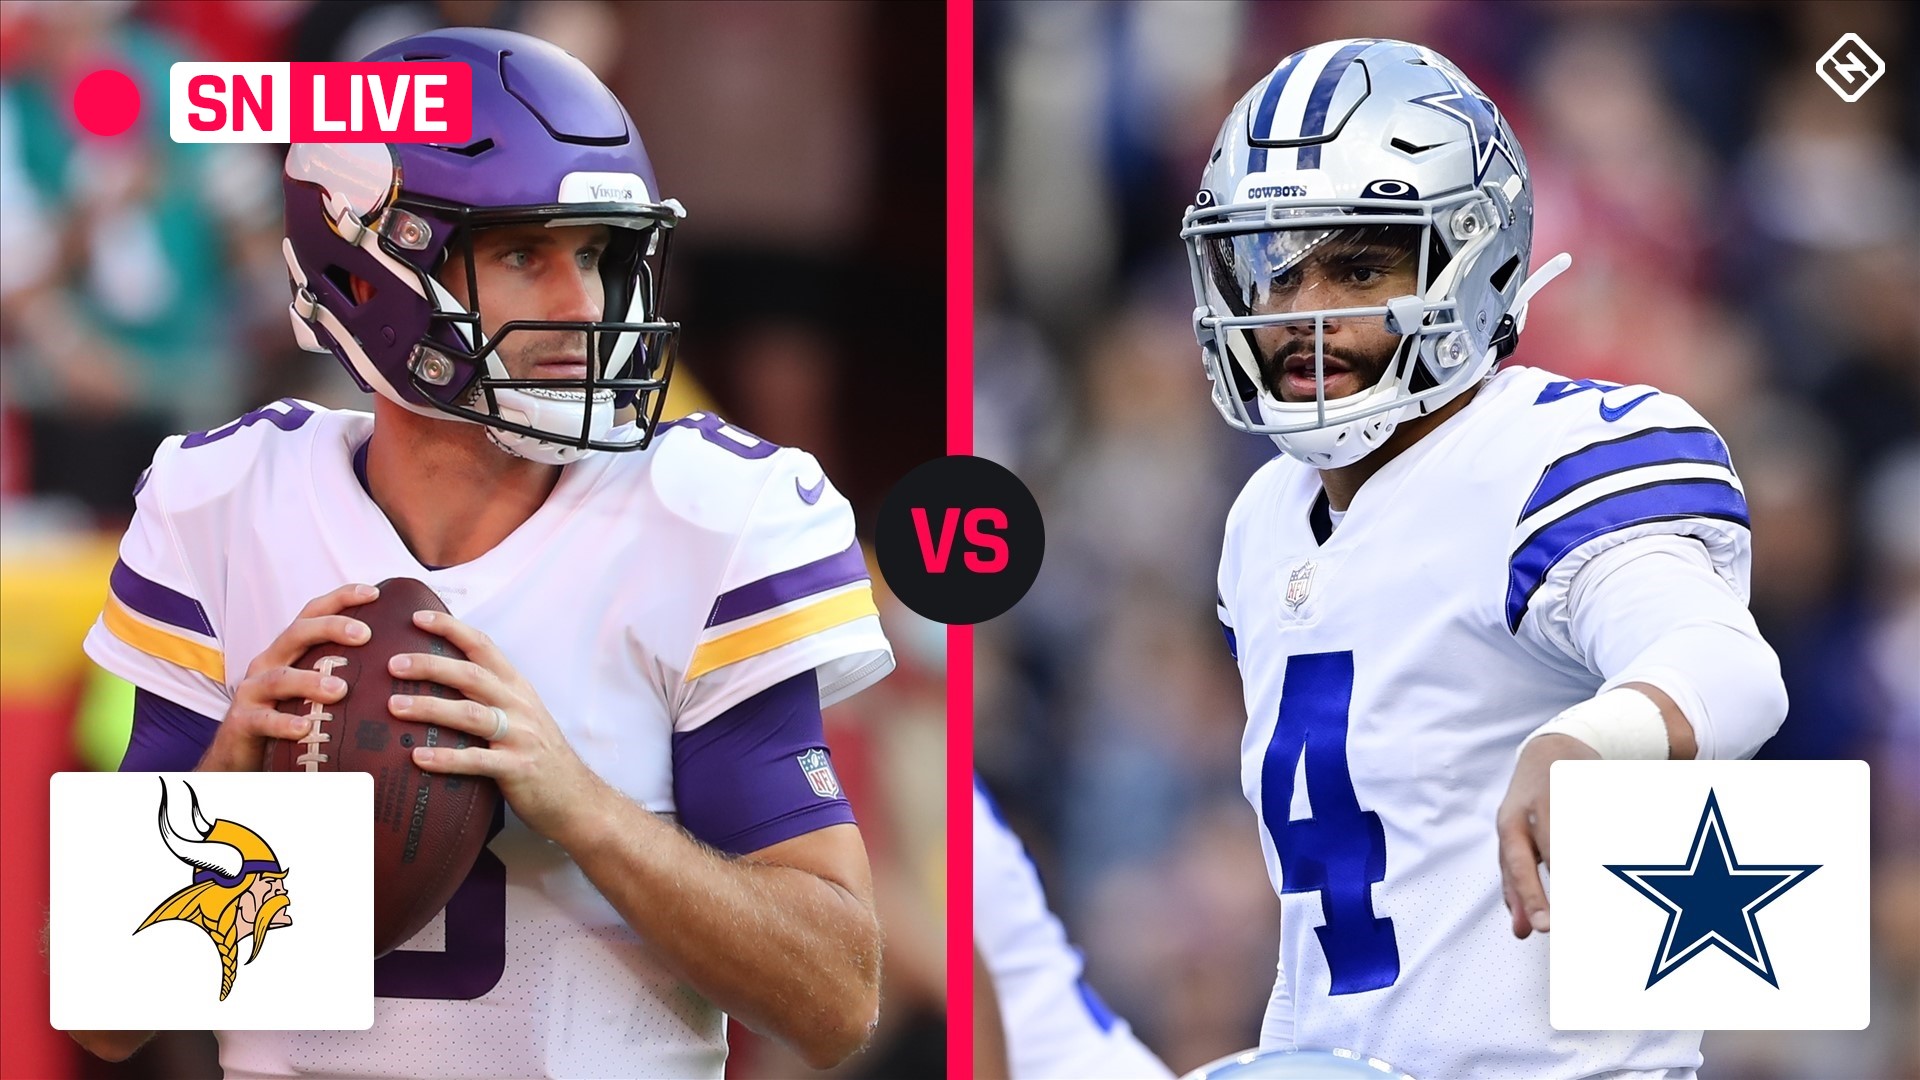 Cowboys vs. Vikings live score, updates, highlights from NFL 'Sunday Night Football' game - Sporting News